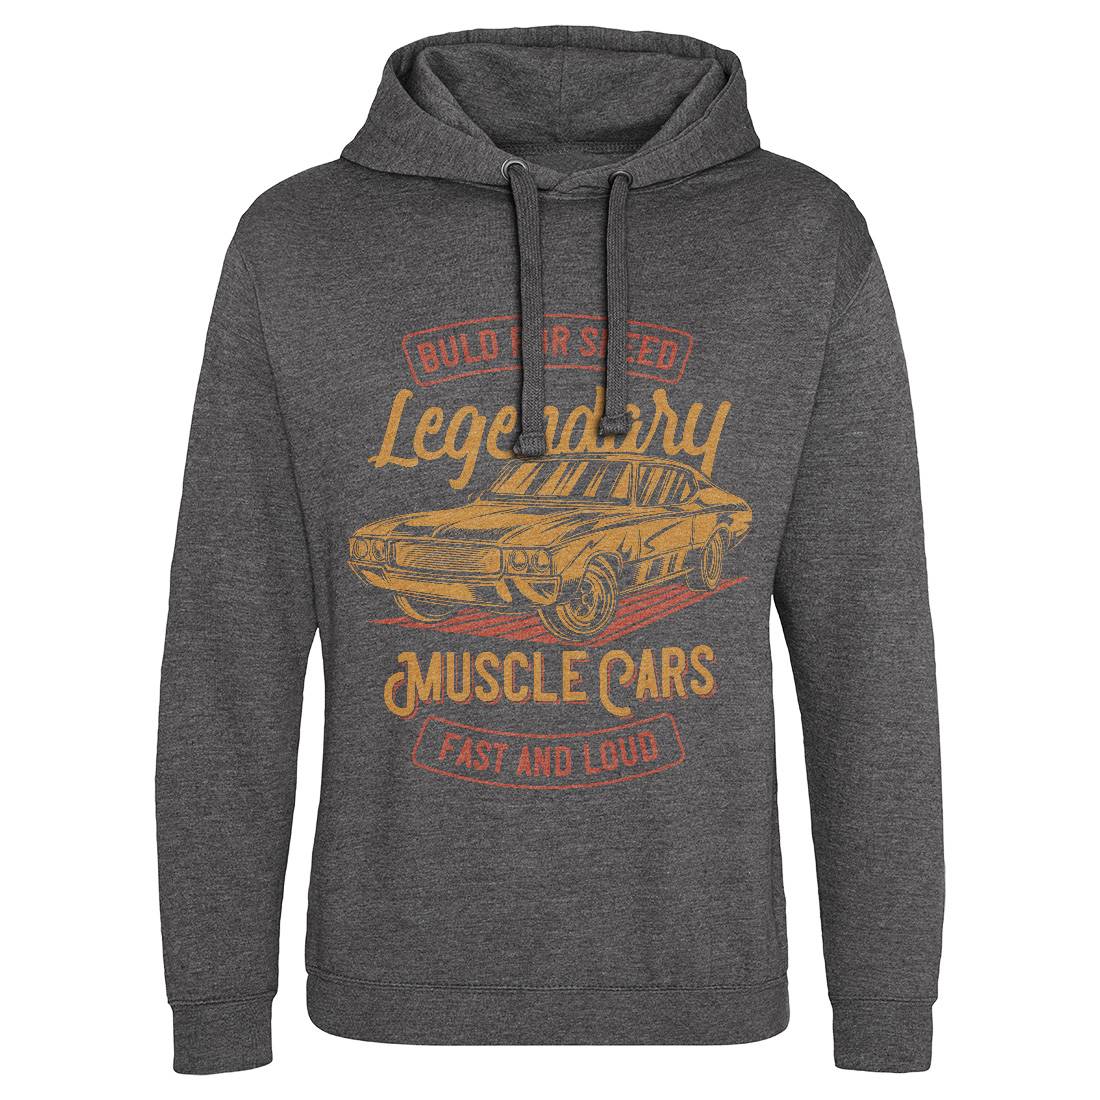 Legendary Muscle Car Mens Hoodie Without Pocket Cars B859